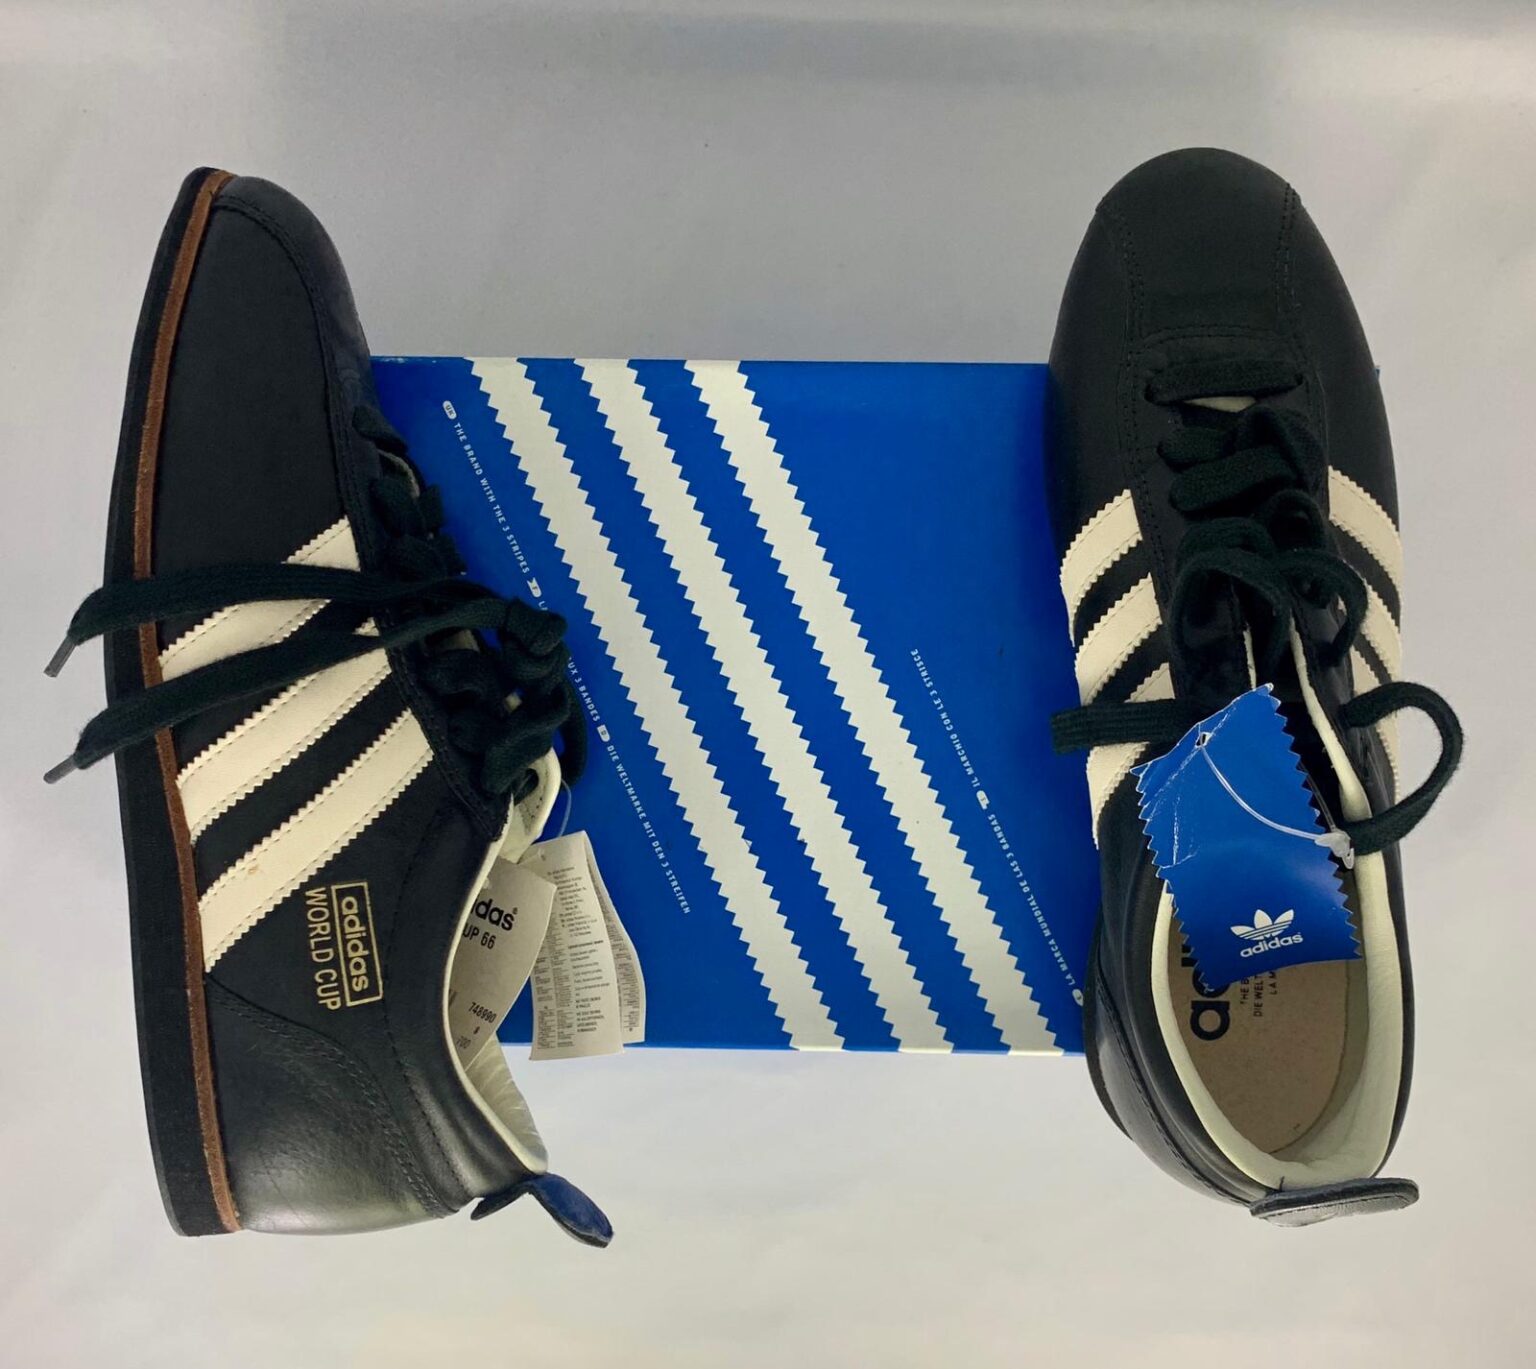 Adidas World Cup 66’ - Kool Thing Vintage Store